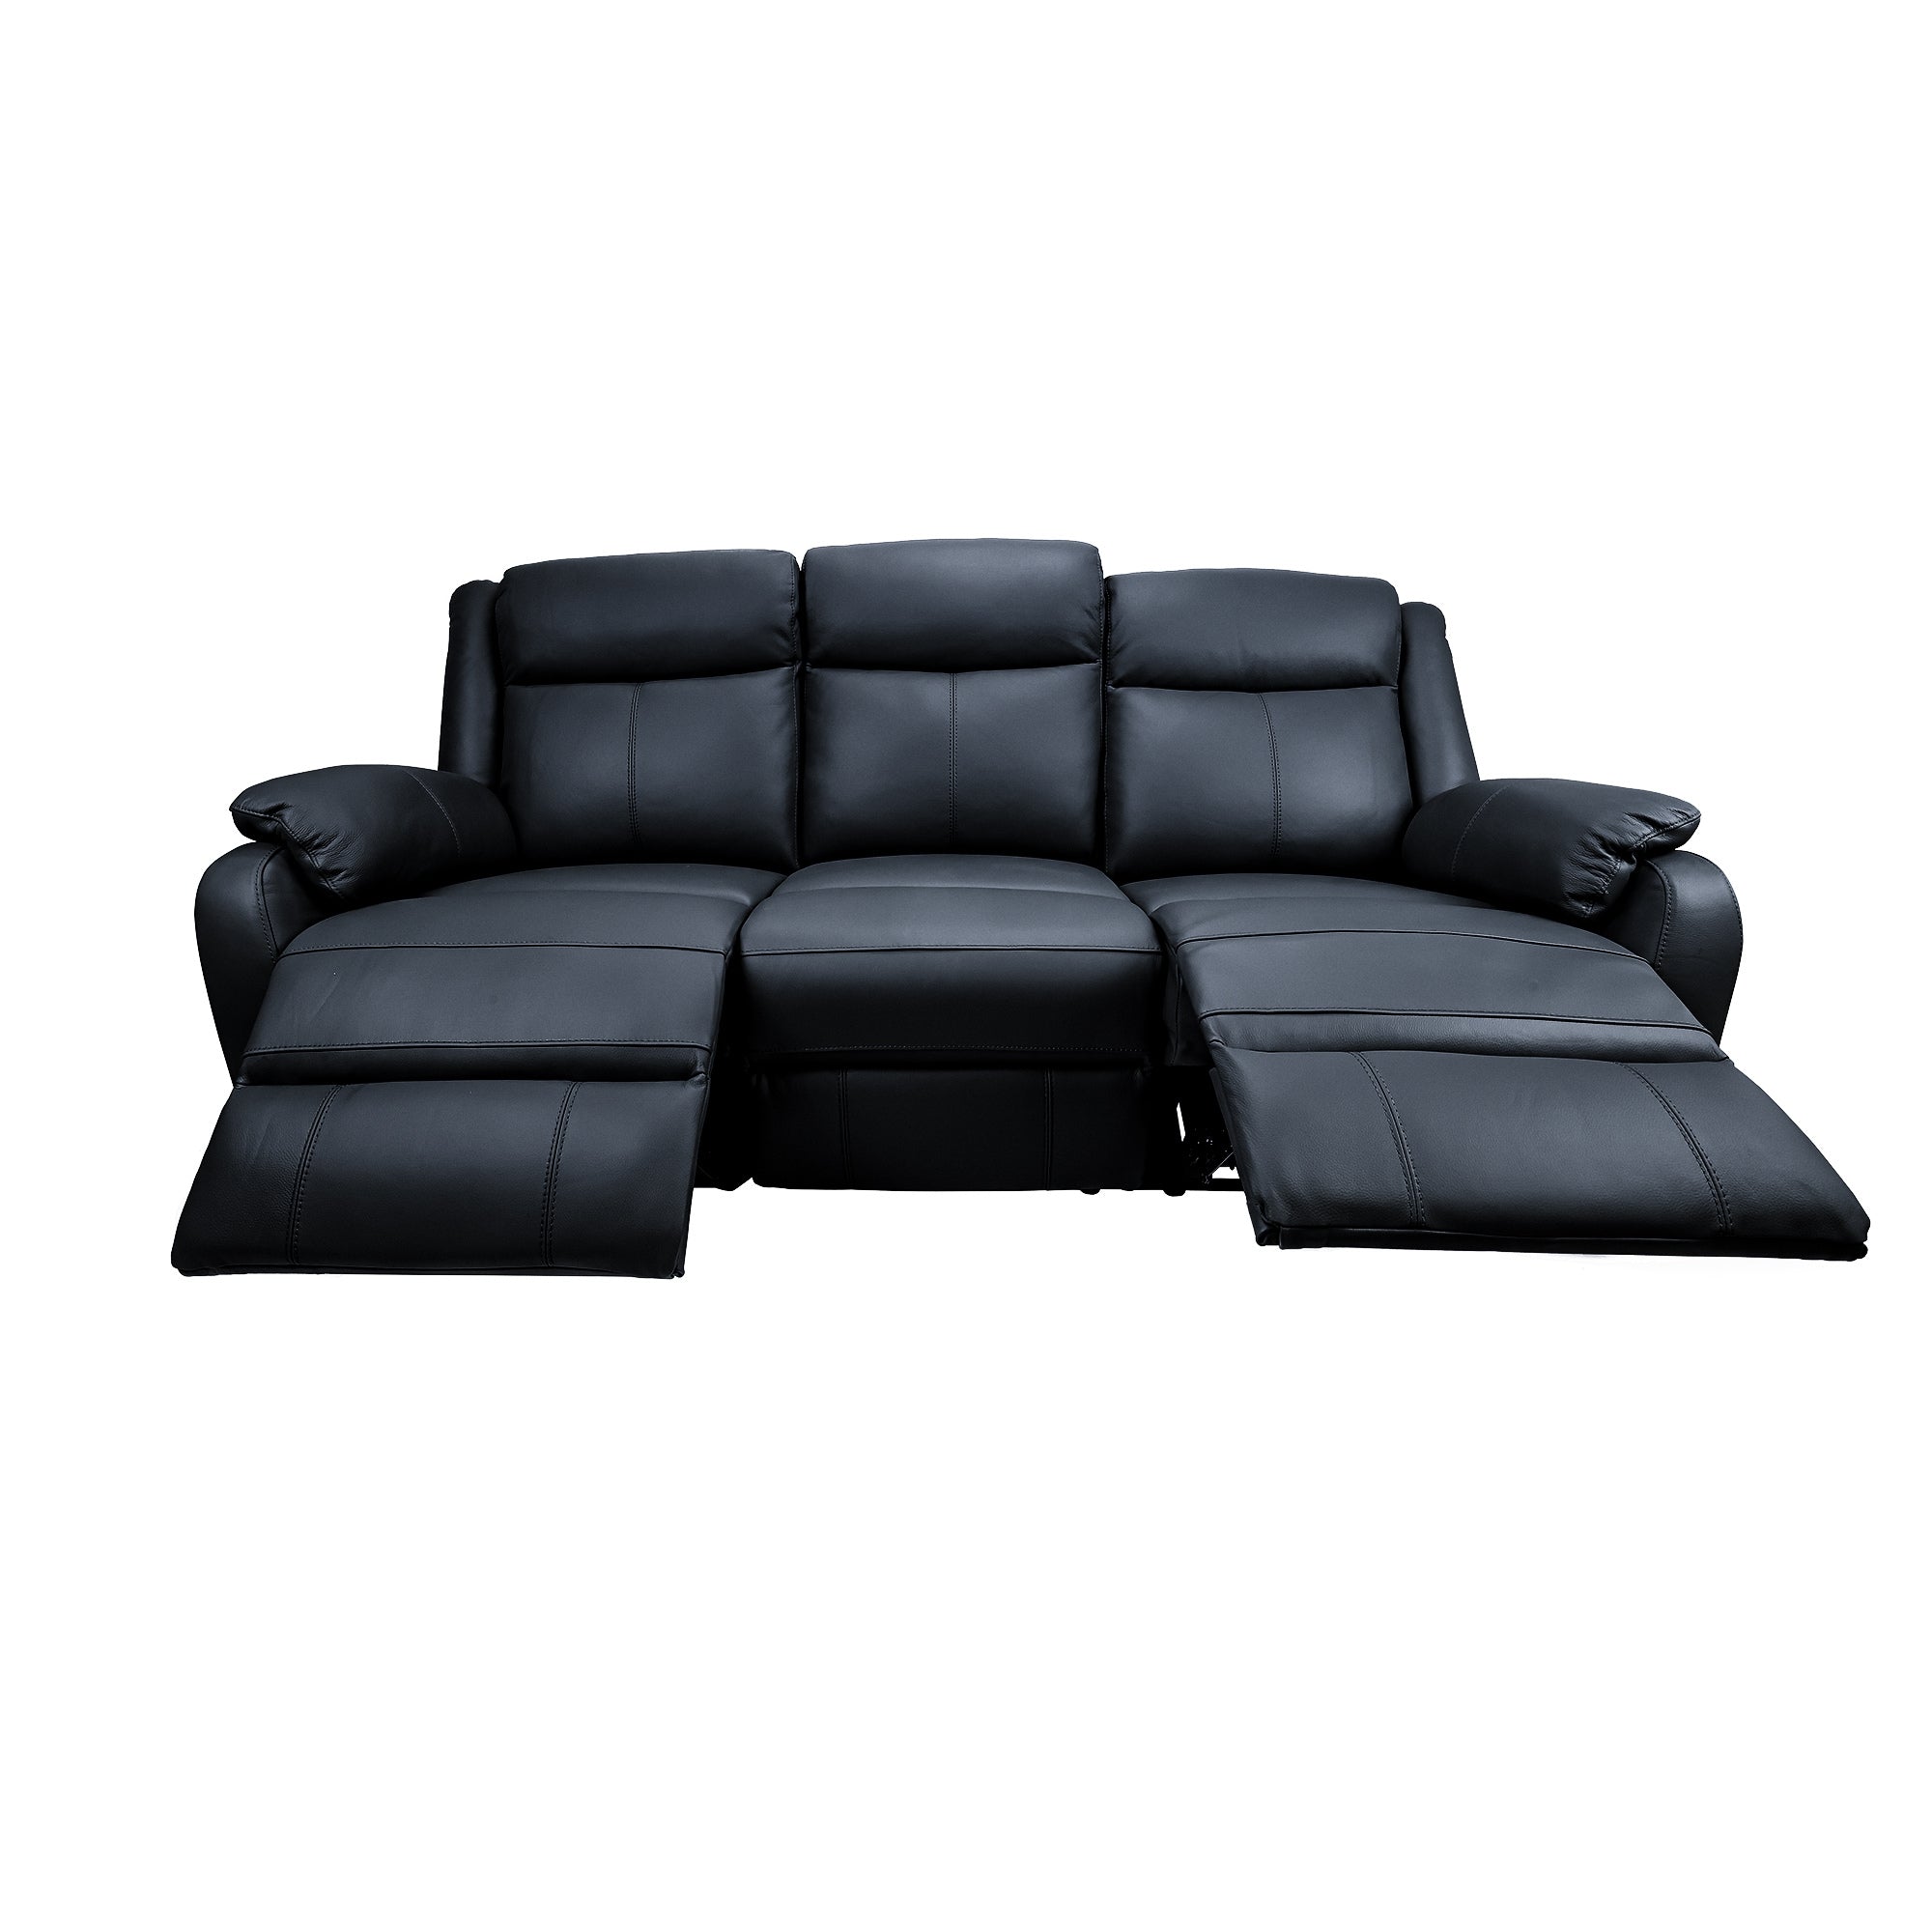 Bella 3 Seater Electric Recliner Genuine Leather Upholstered Lounge - Black